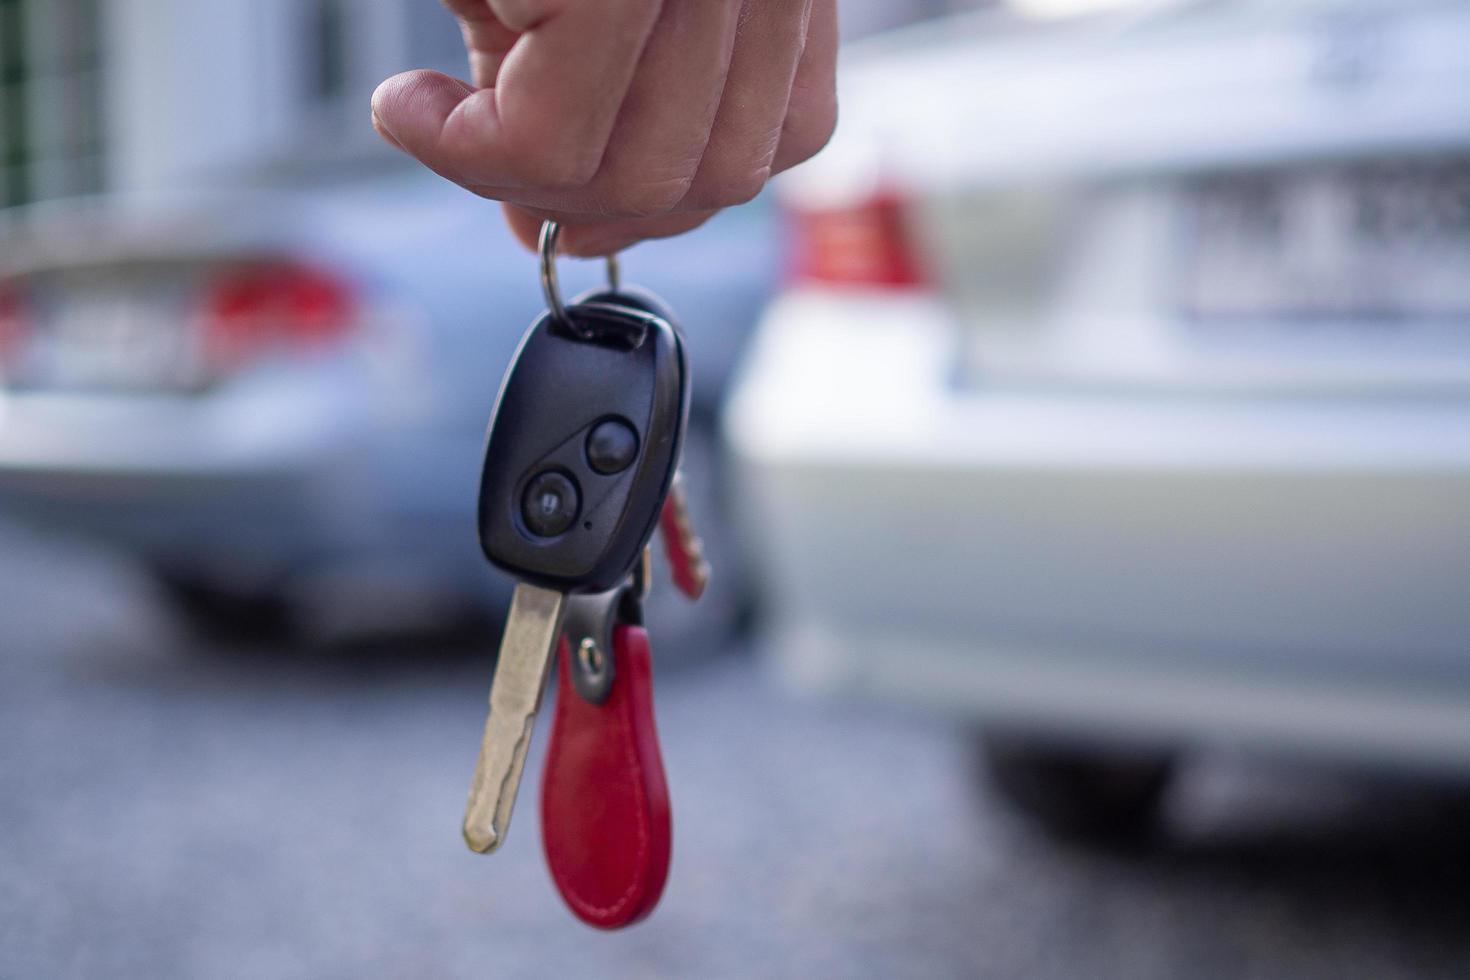 The car salesman and the key to the new owner. photo